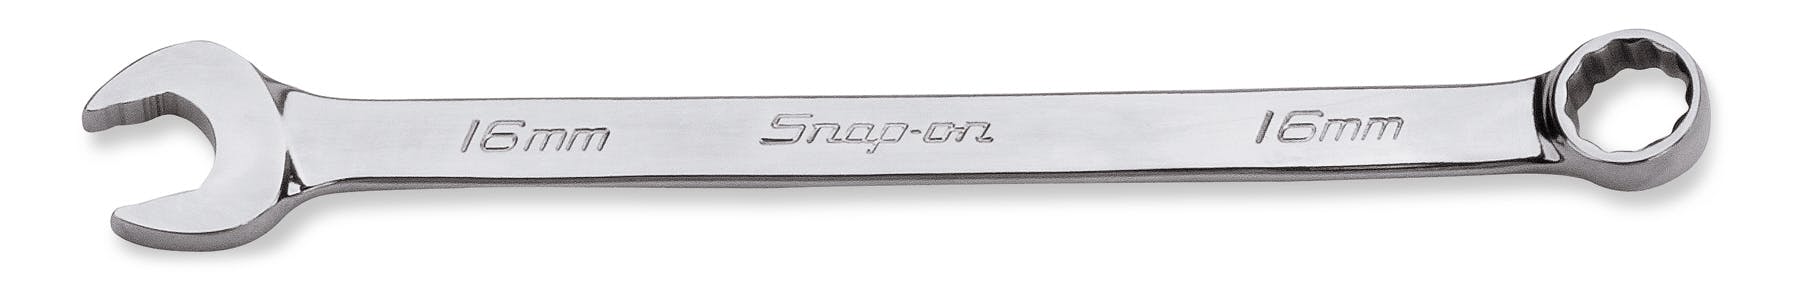 16 mm 12-Point Metric Flank Drive® Plus Combination Wrench SOEXM16  Snap-on Store